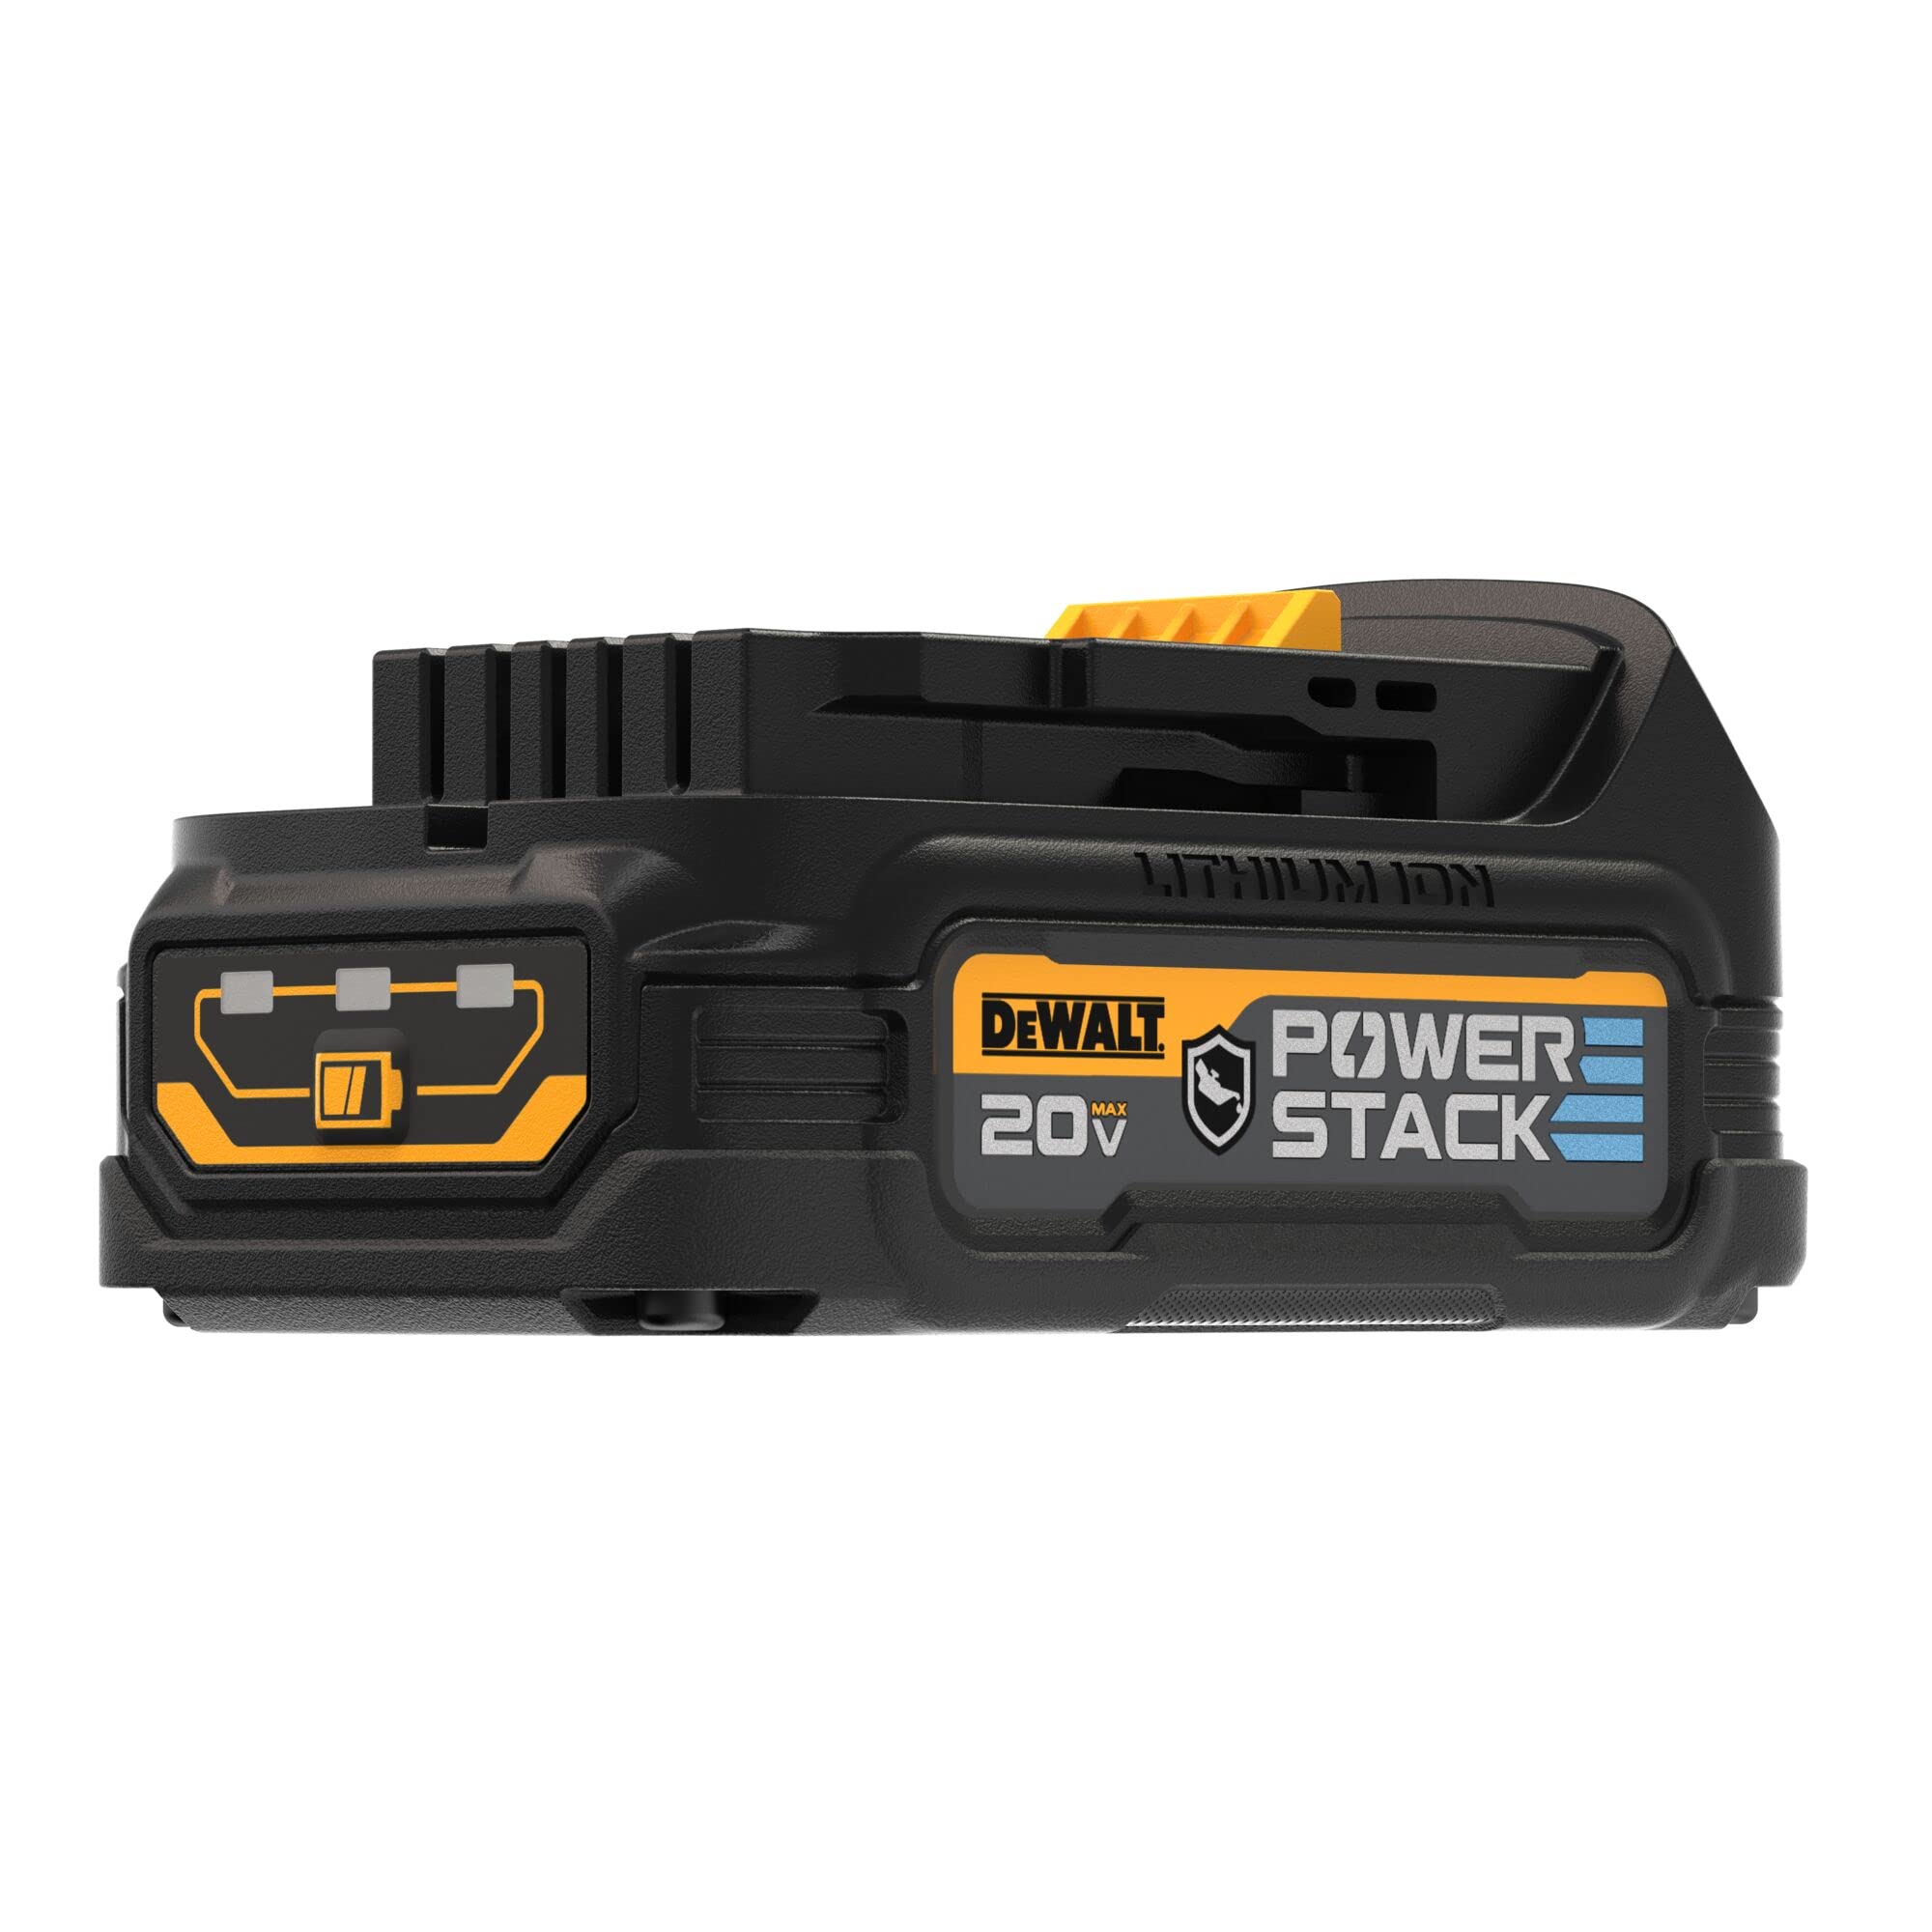 DEWALT 20V Max Powerstack Gfn Compact Battery (DCBP034G) - Amazon free delivery for prime users $67.95